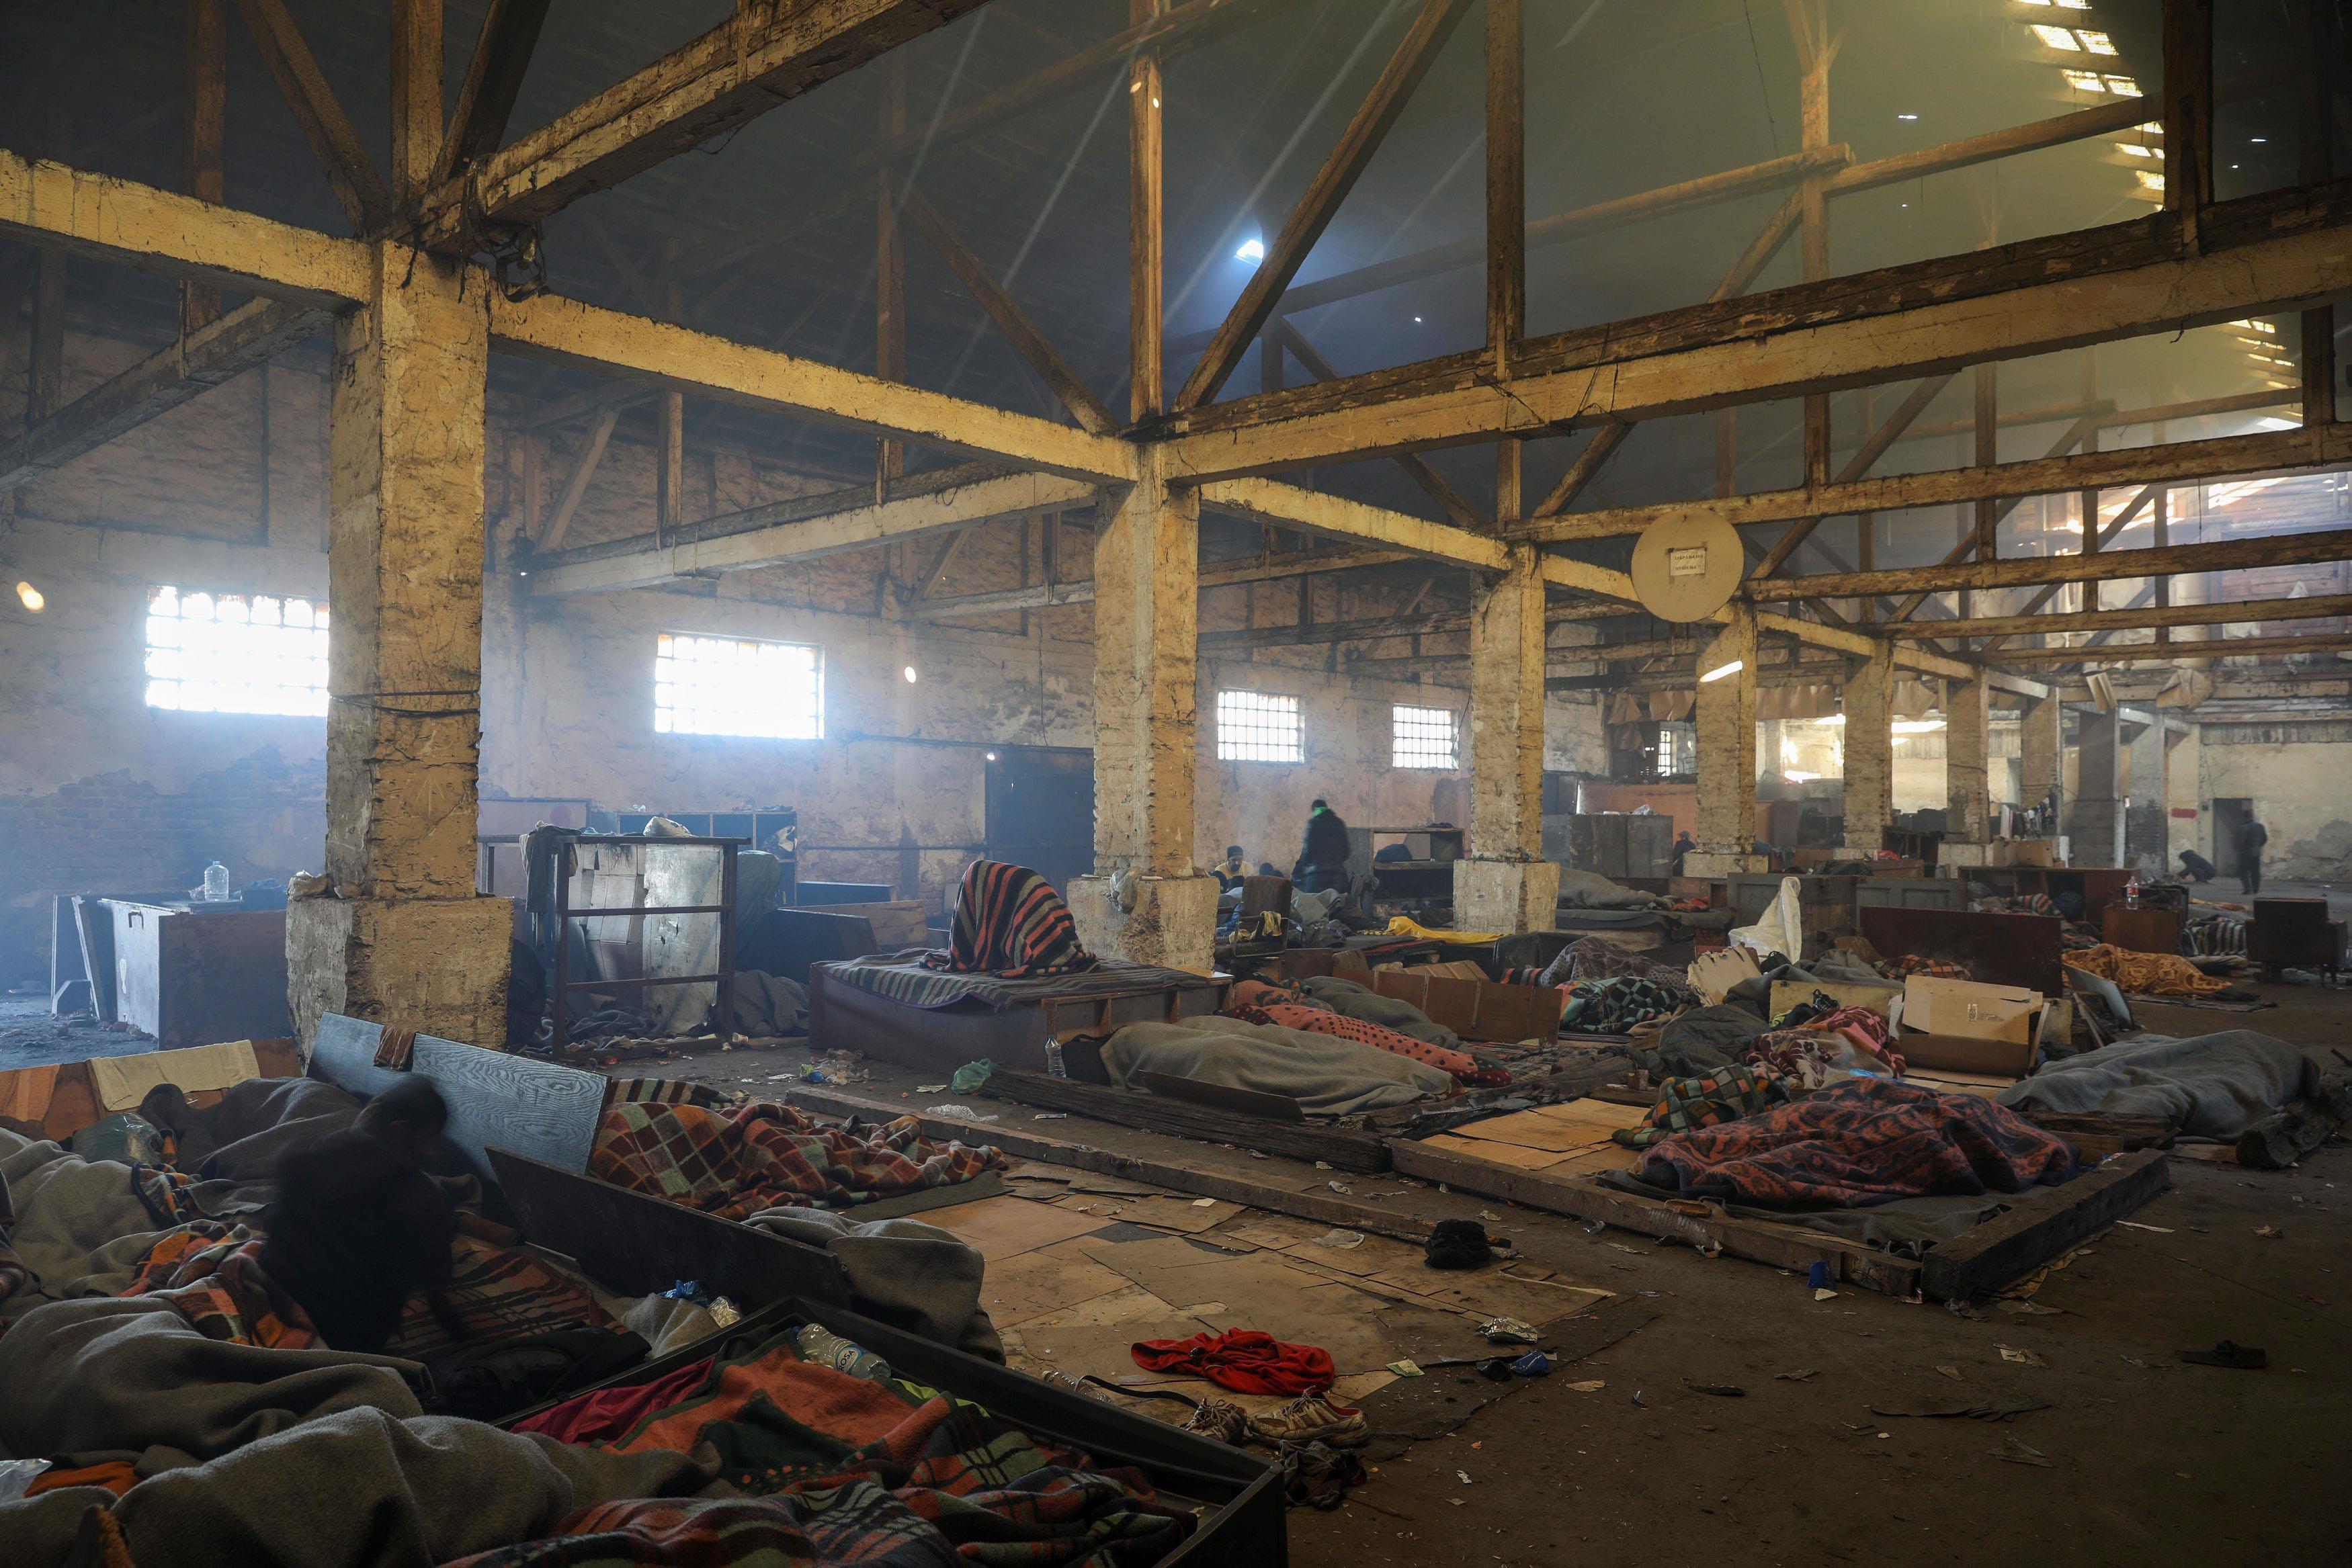 The Wider Image: Trapped in Serbia, migrants shelter in warehouse